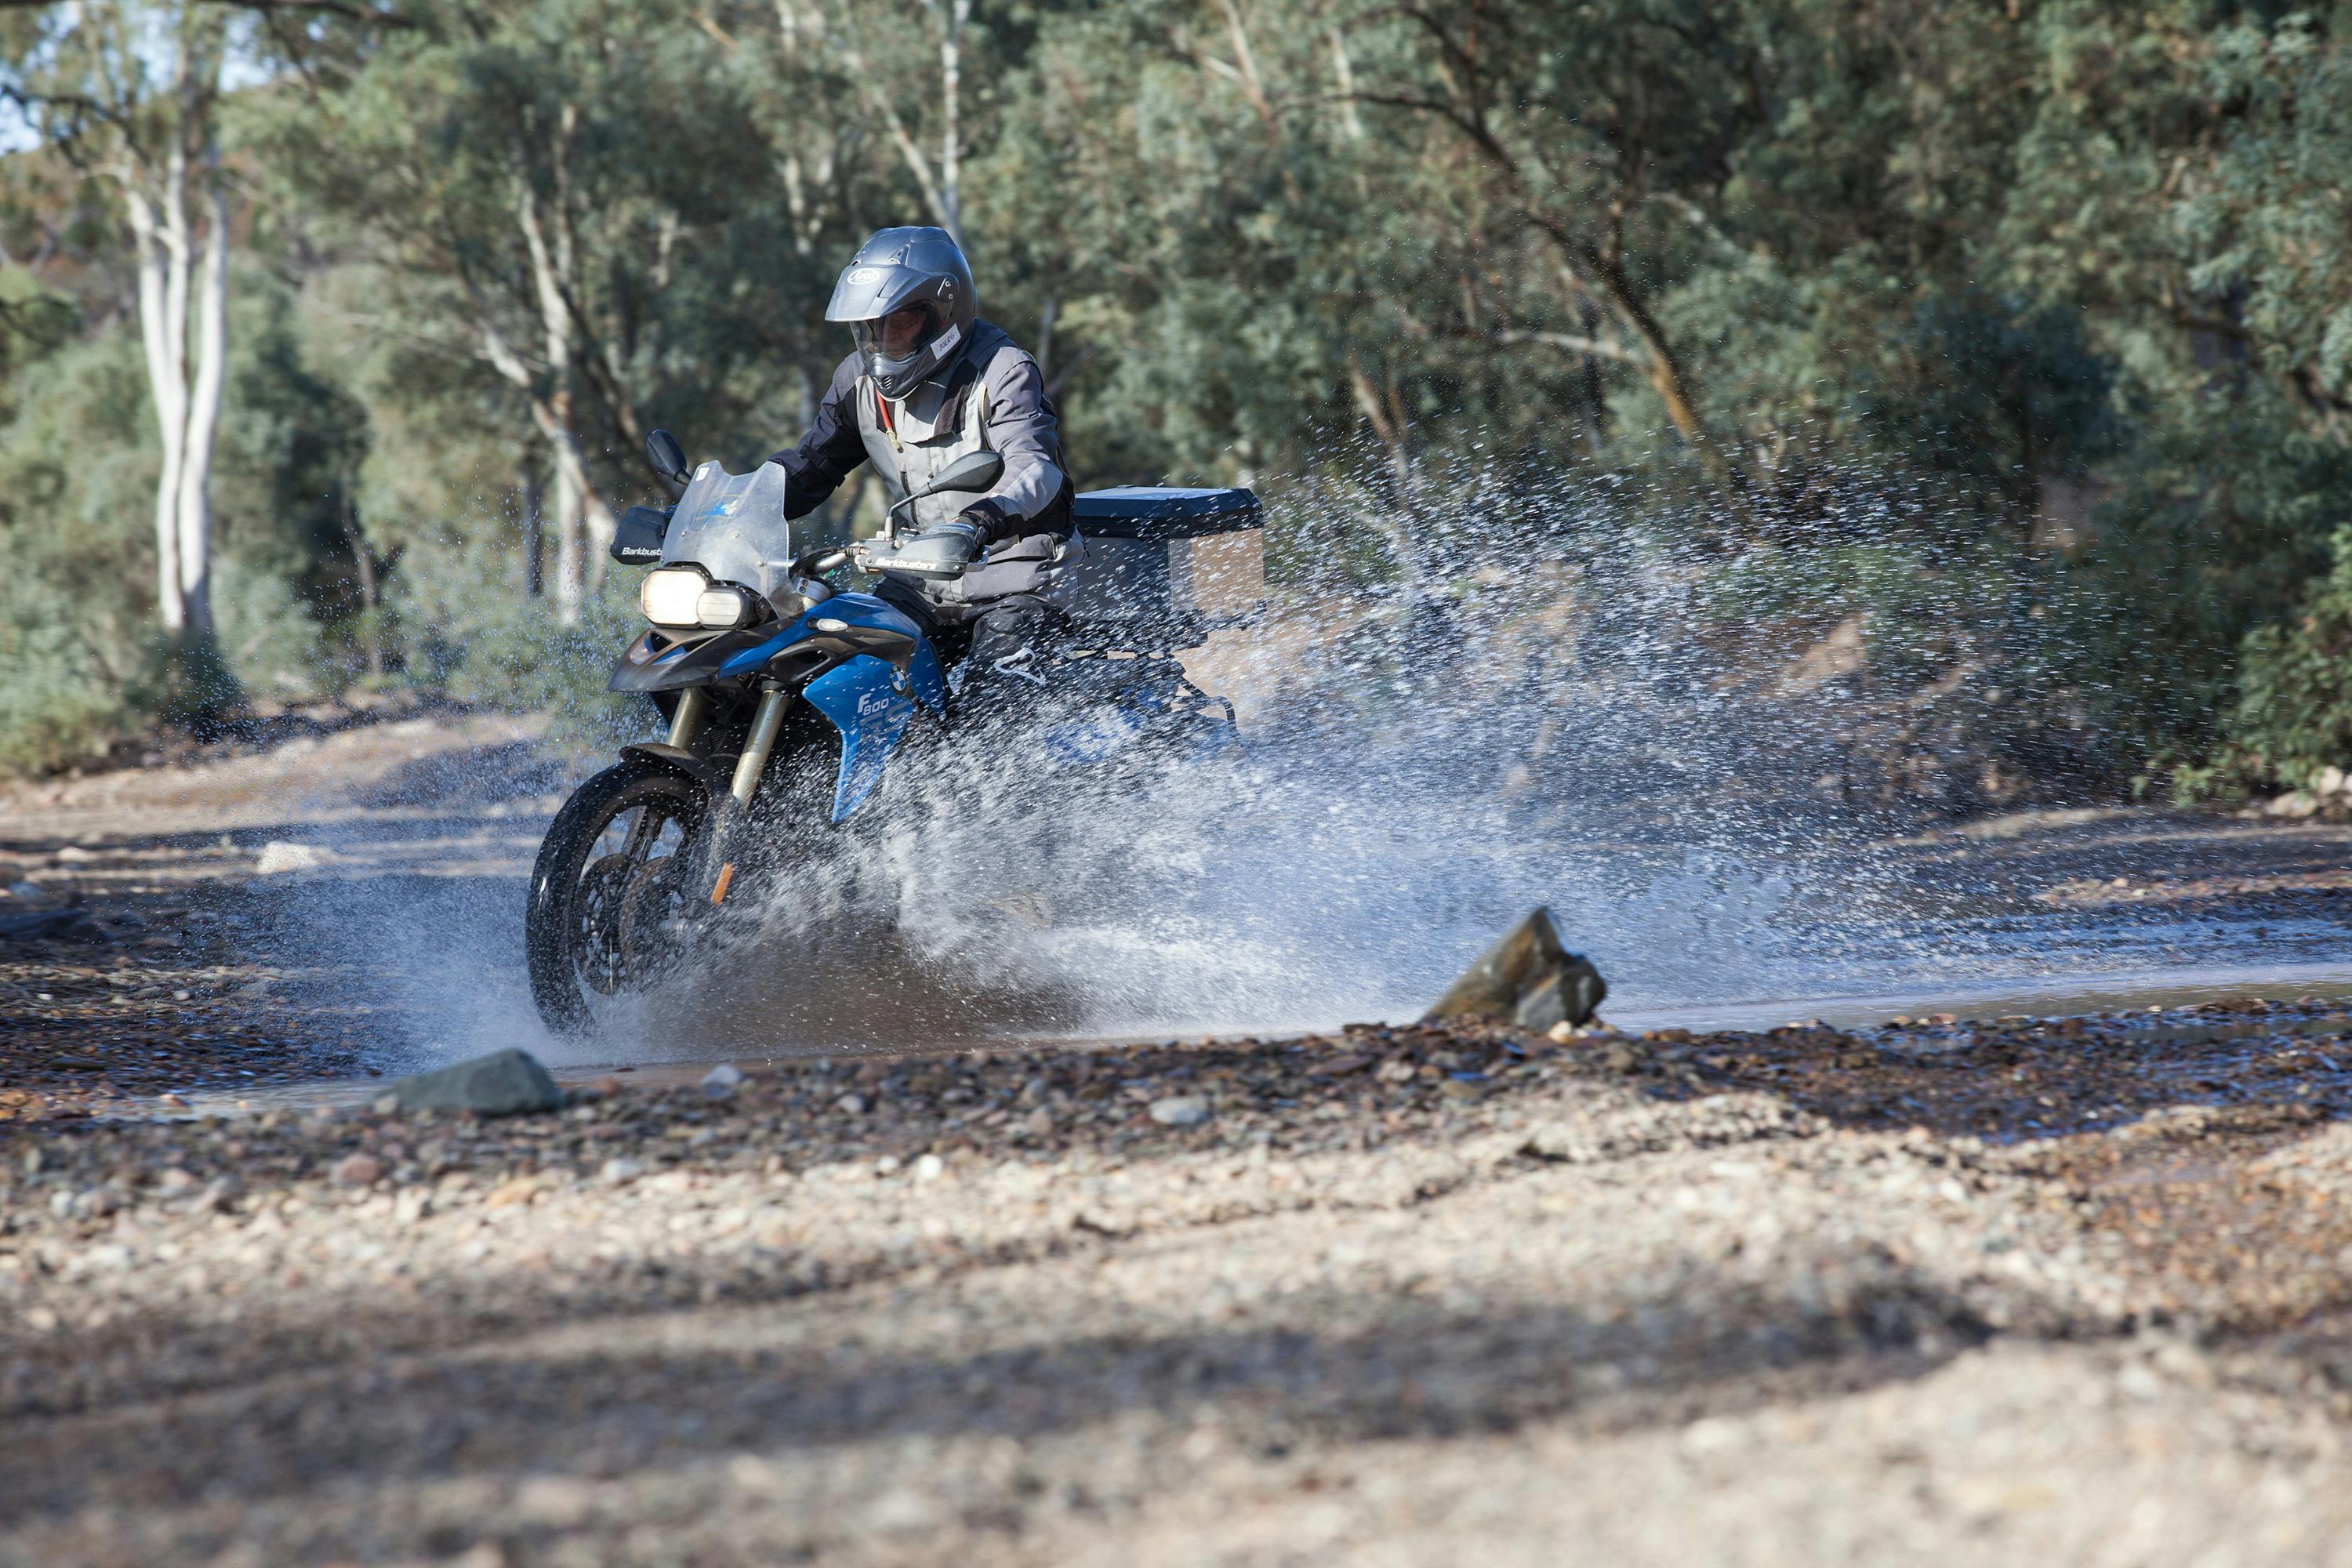 Compass Expeditions Adventure Motorcycle Tours of Australia and around the world